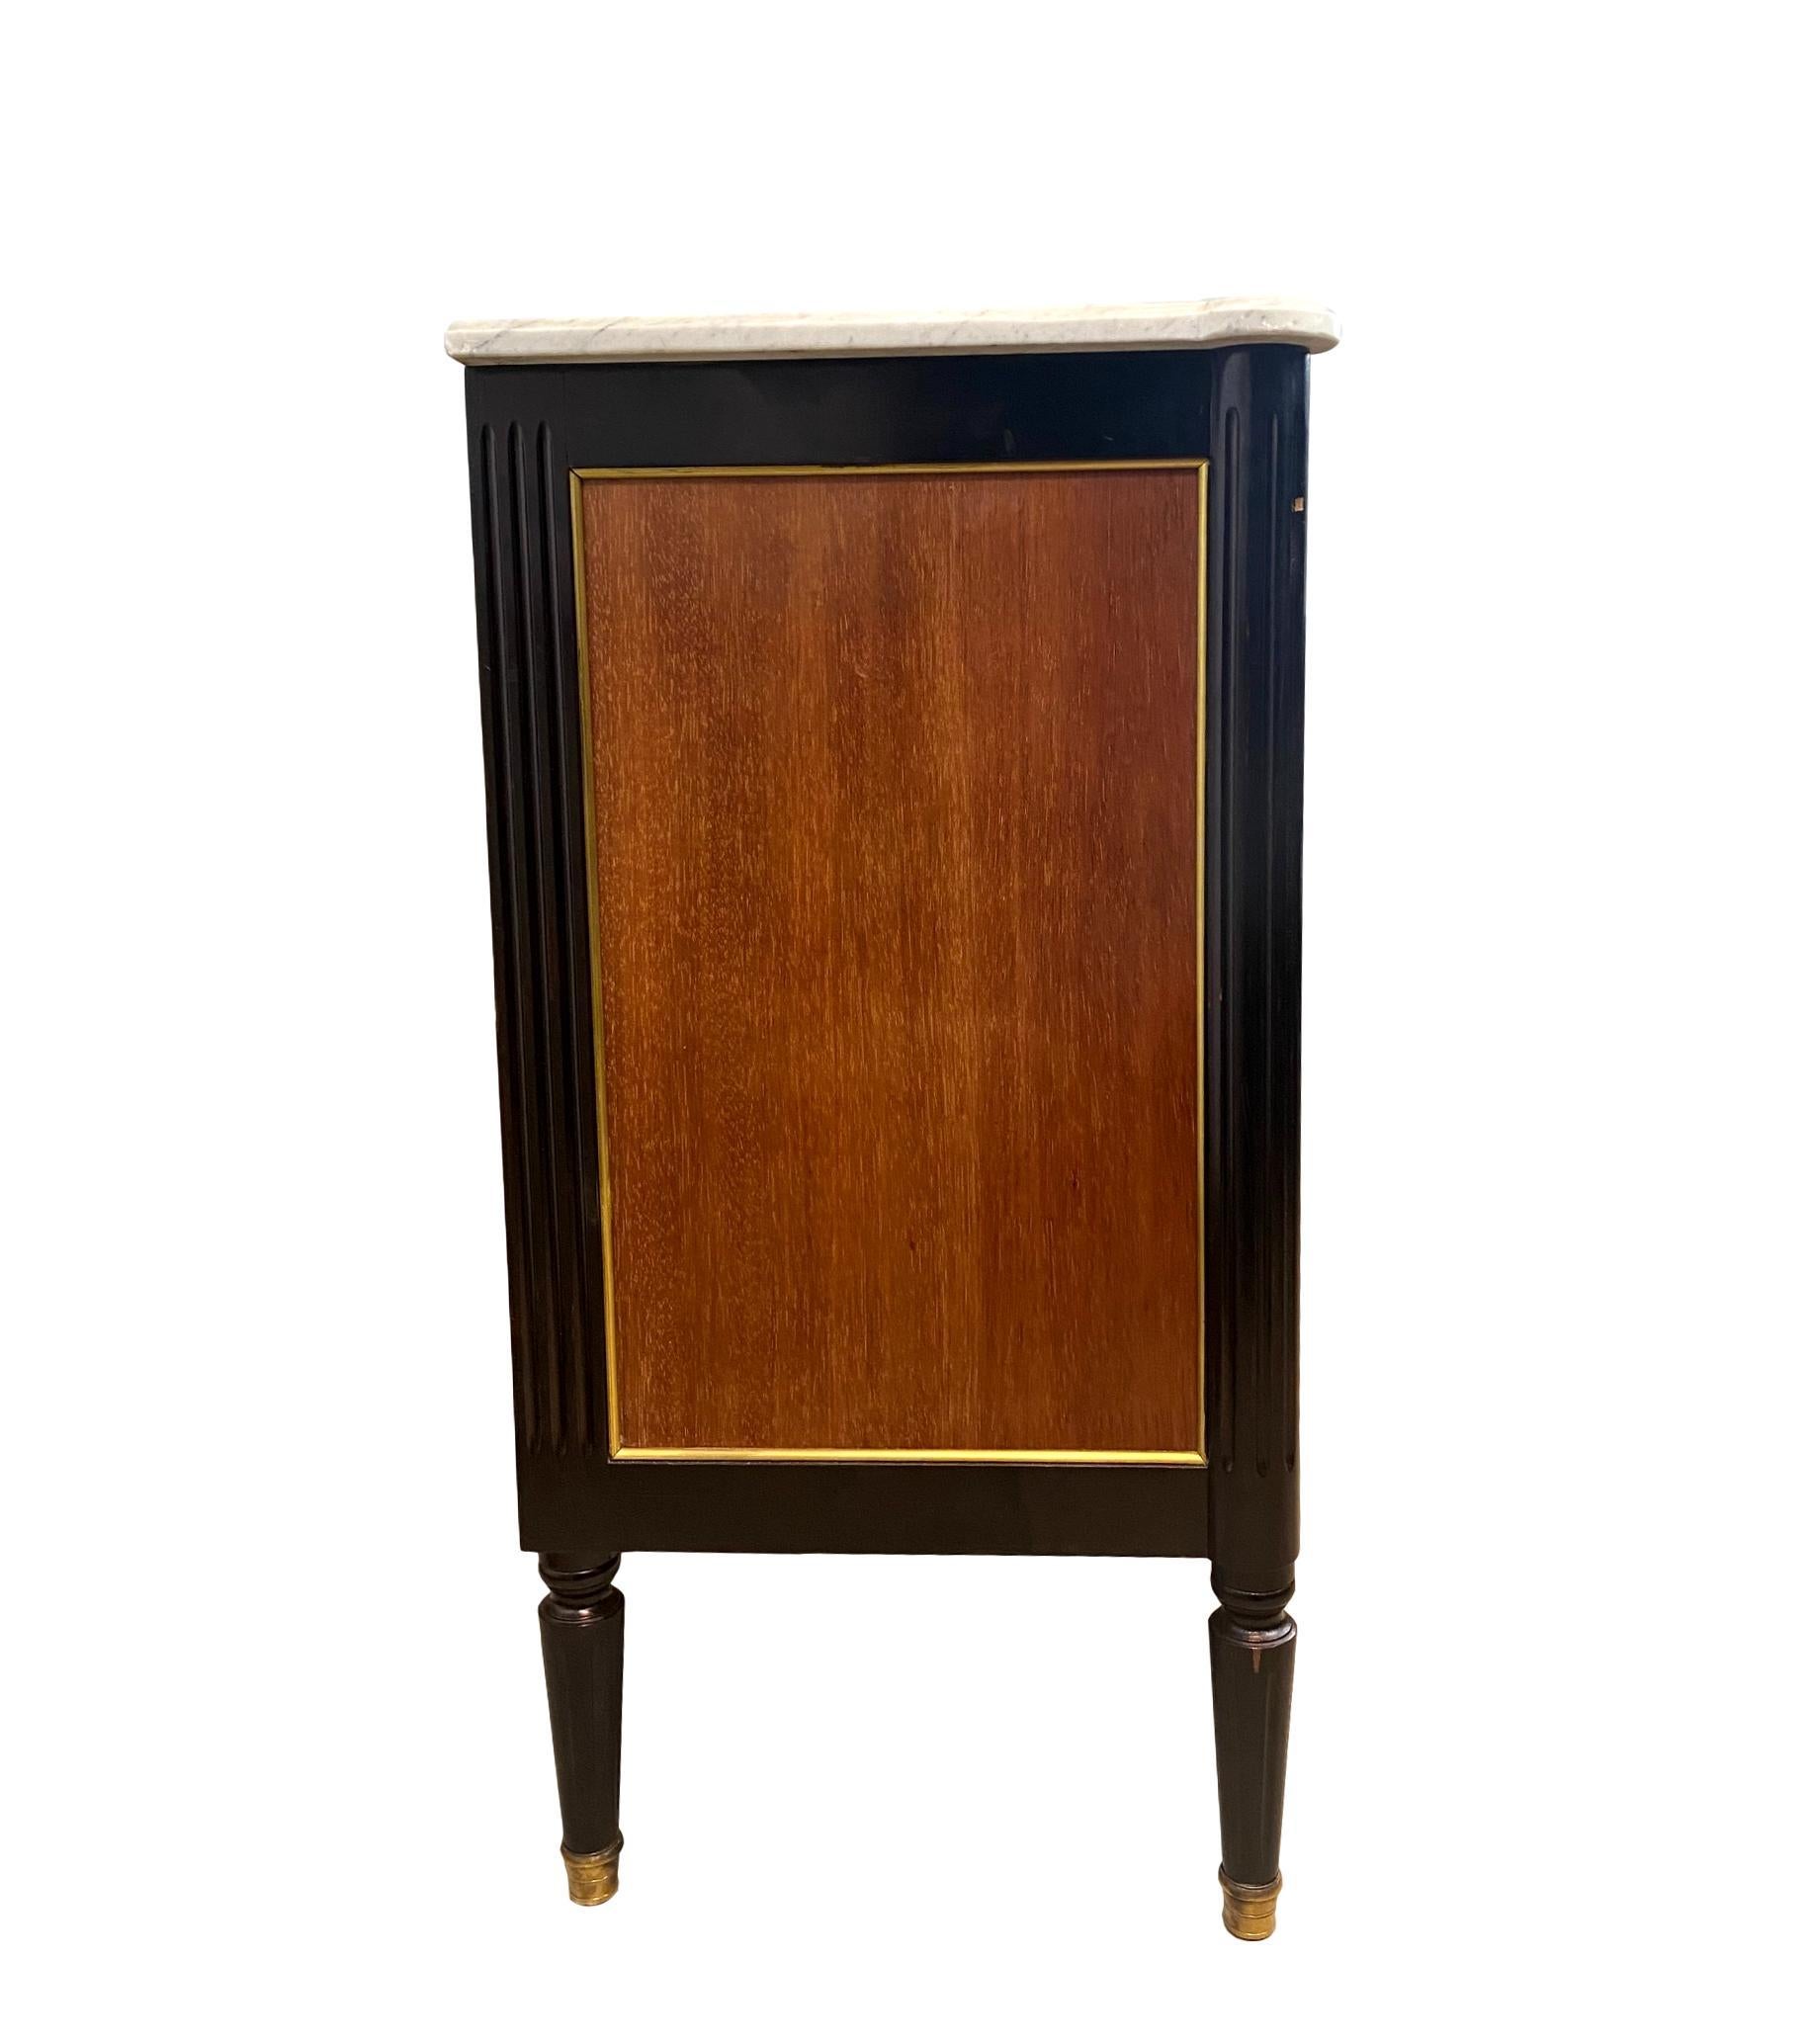 20th Century Jansen Ebonized and Mahogany Bronze Mounted Marble-Top Commode, French